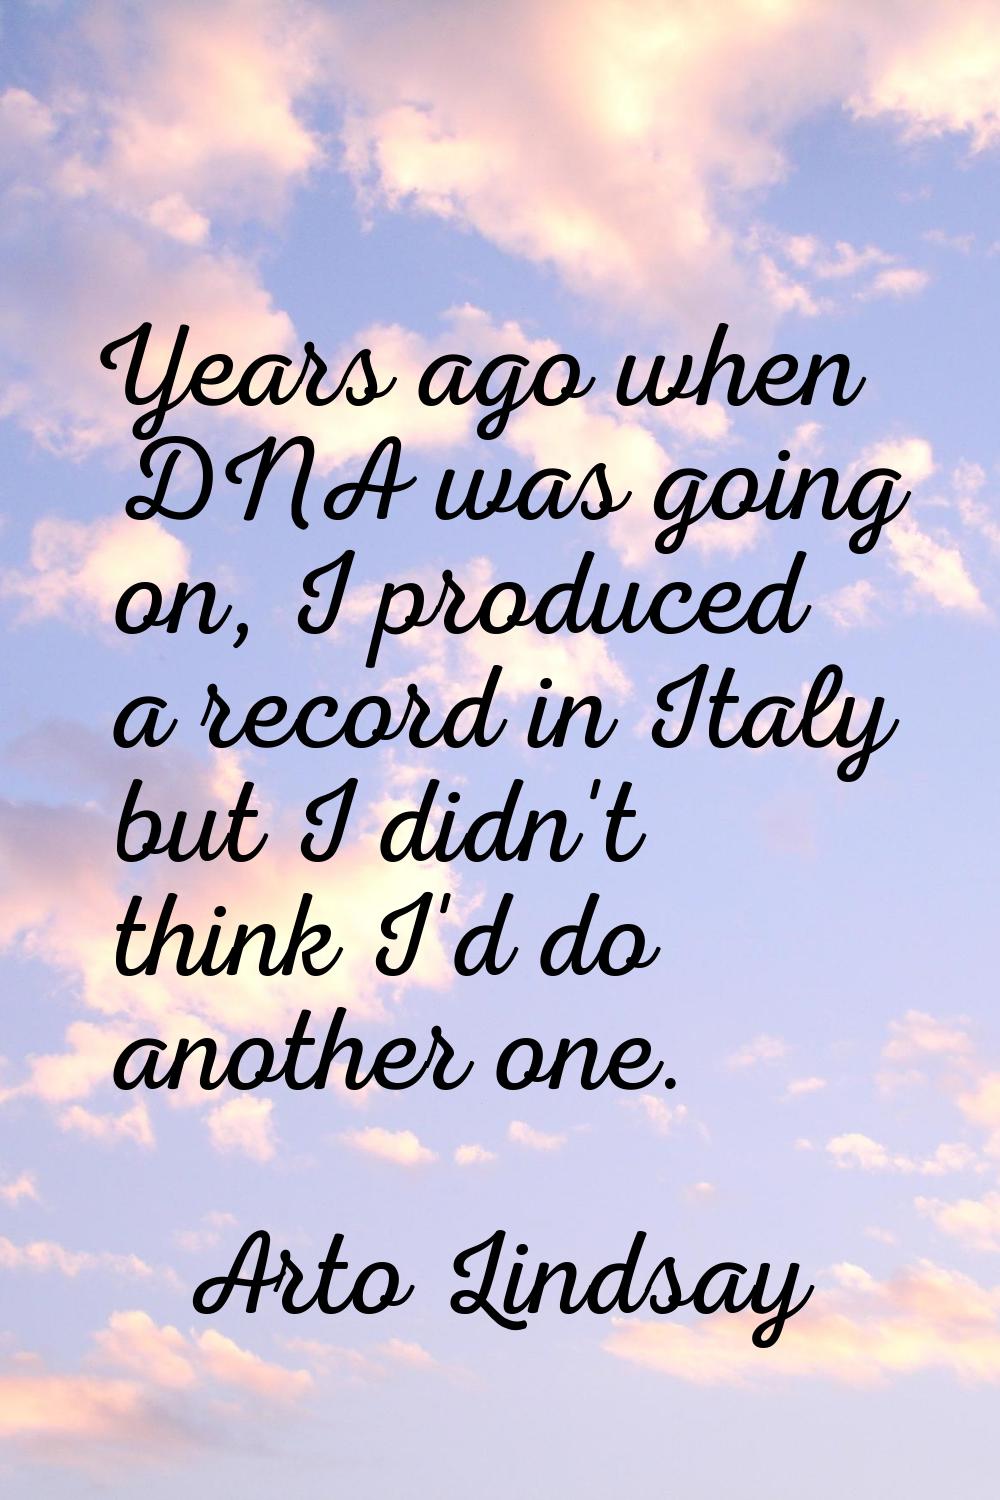 Years ago when DNA was going on, I produced a record in Italy but I didn't think I'd do another one